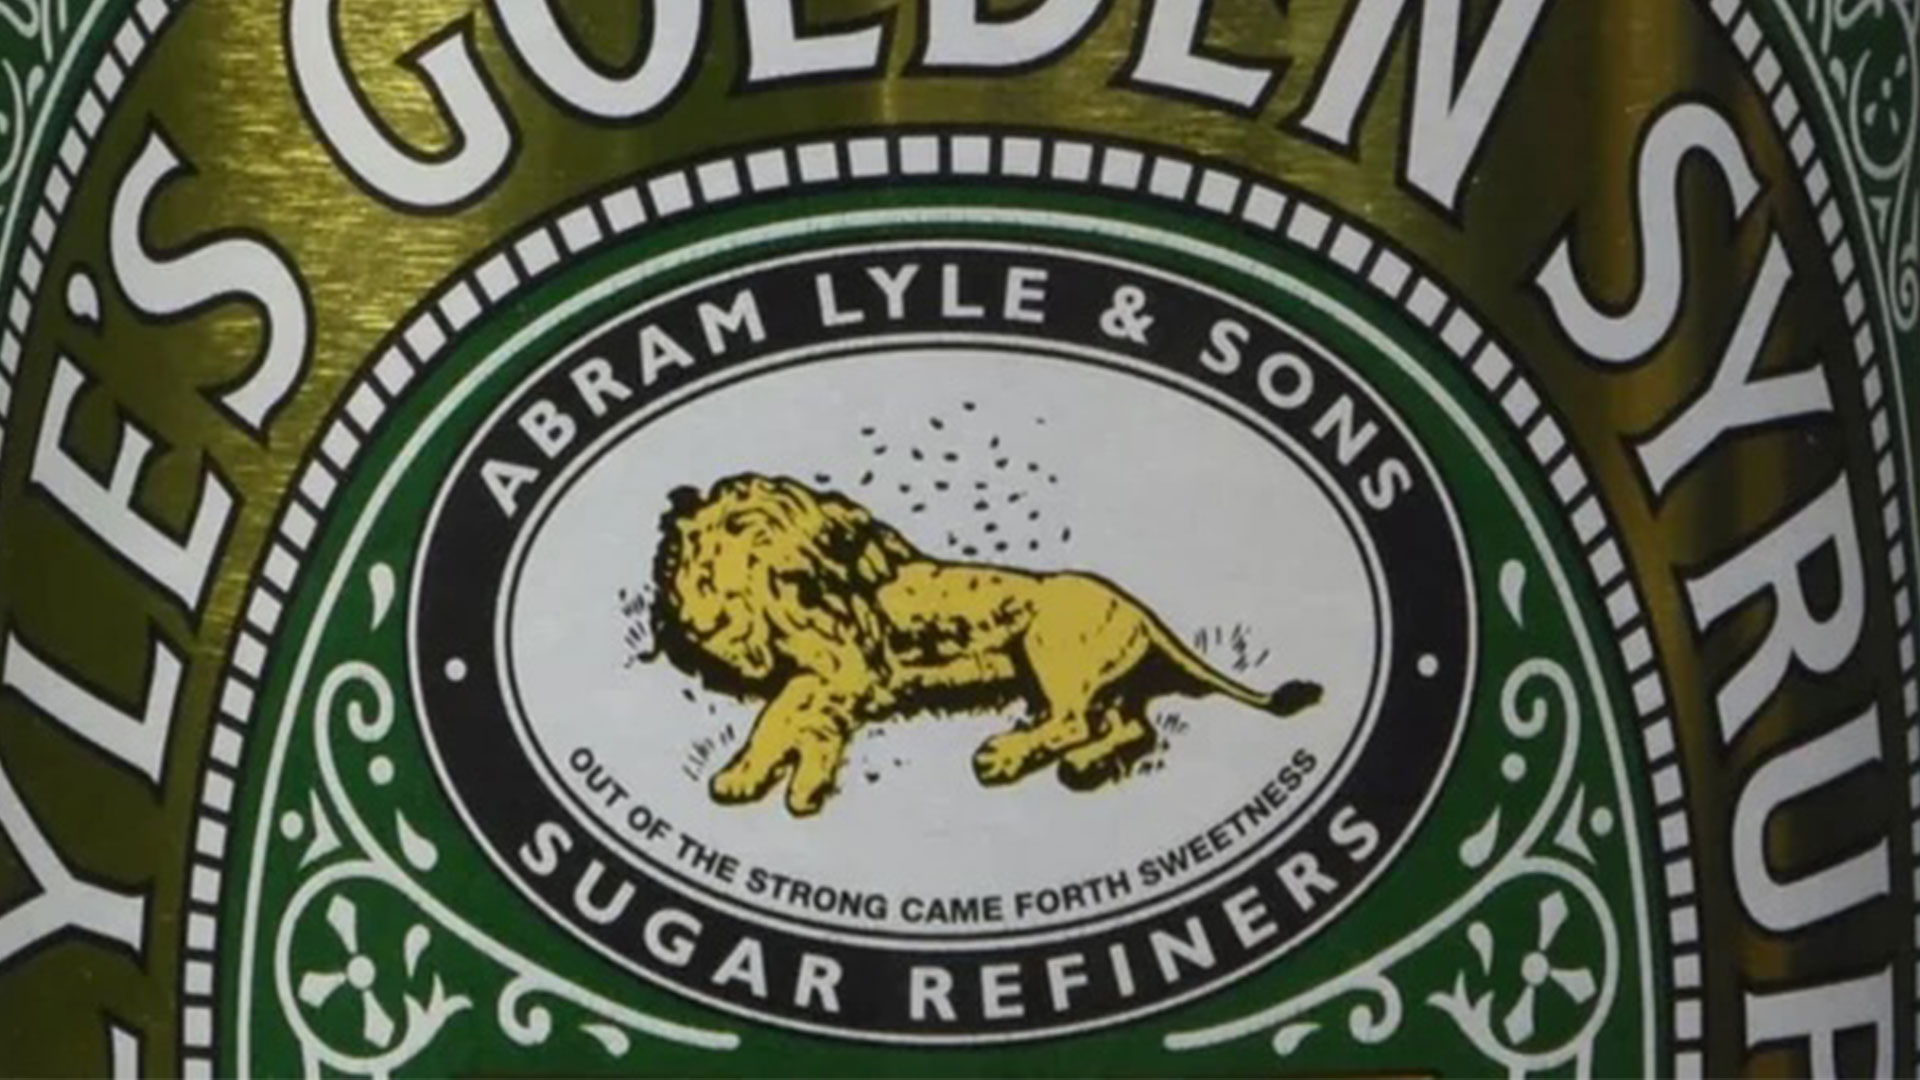 What’s the Bible story behind Lyle’s Golden Syrup?